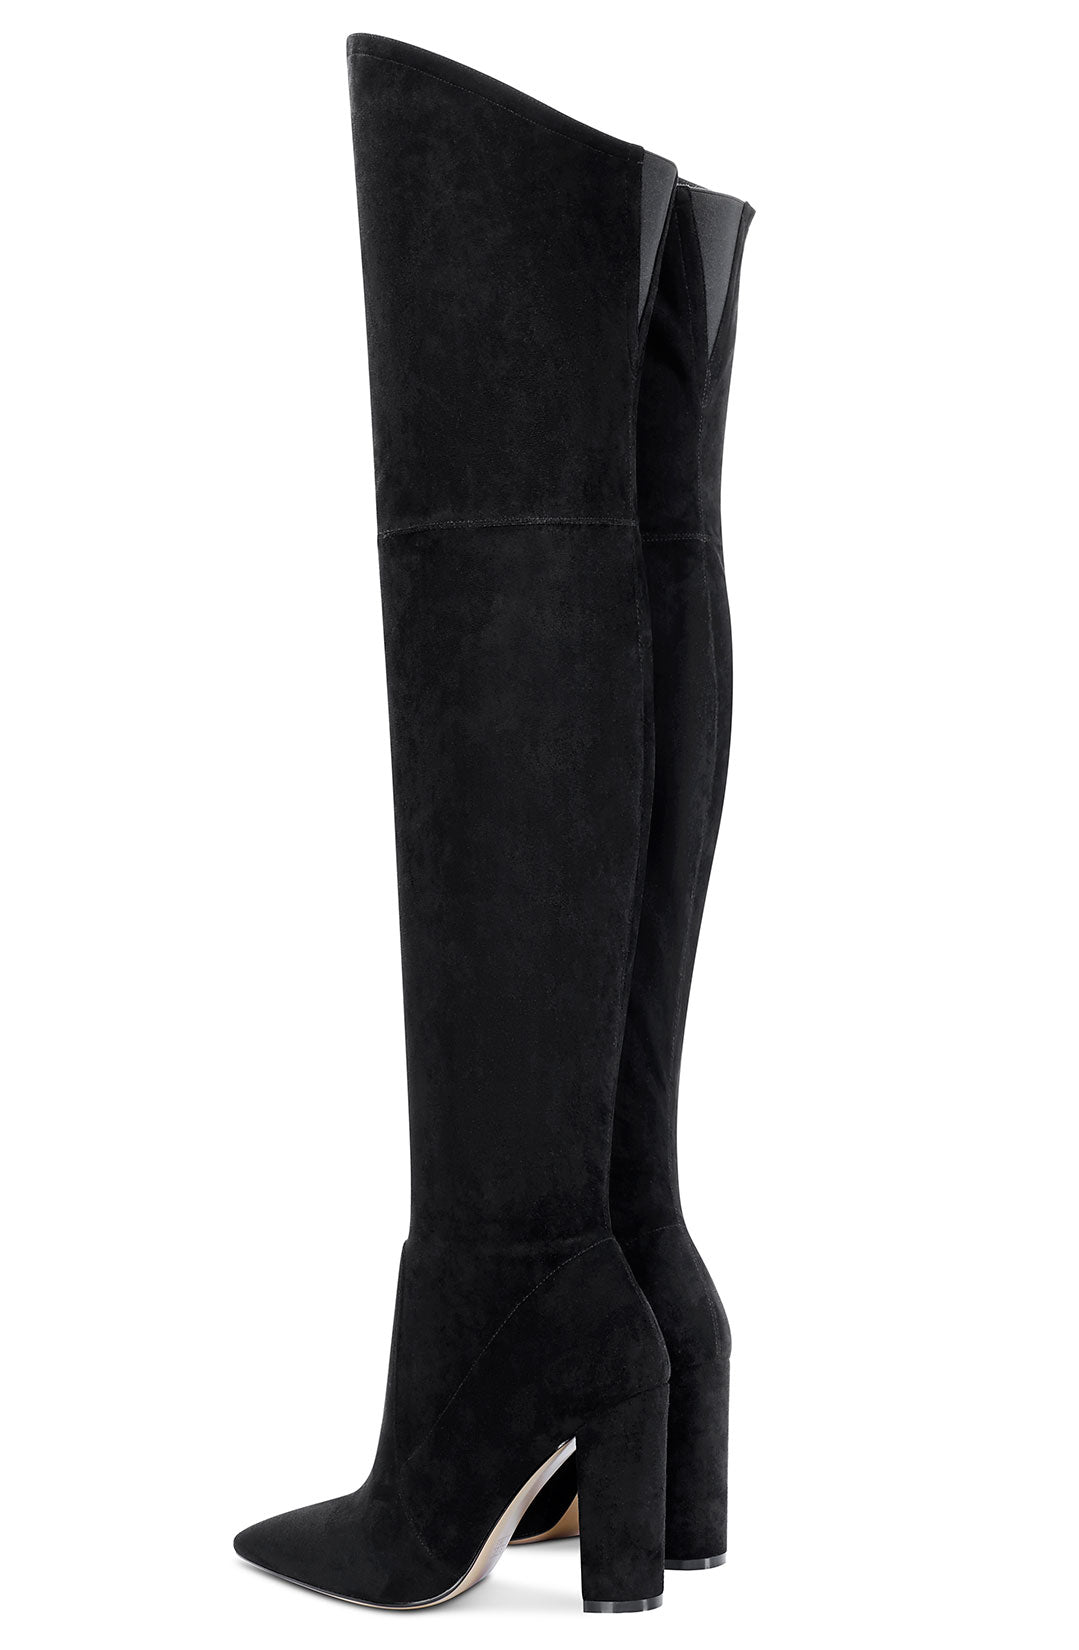 CASTAMERE Womens High Heels Over The Knee Boots Sexy Pointy Toe Chunky Block 10CM Heel Boot with Zipper